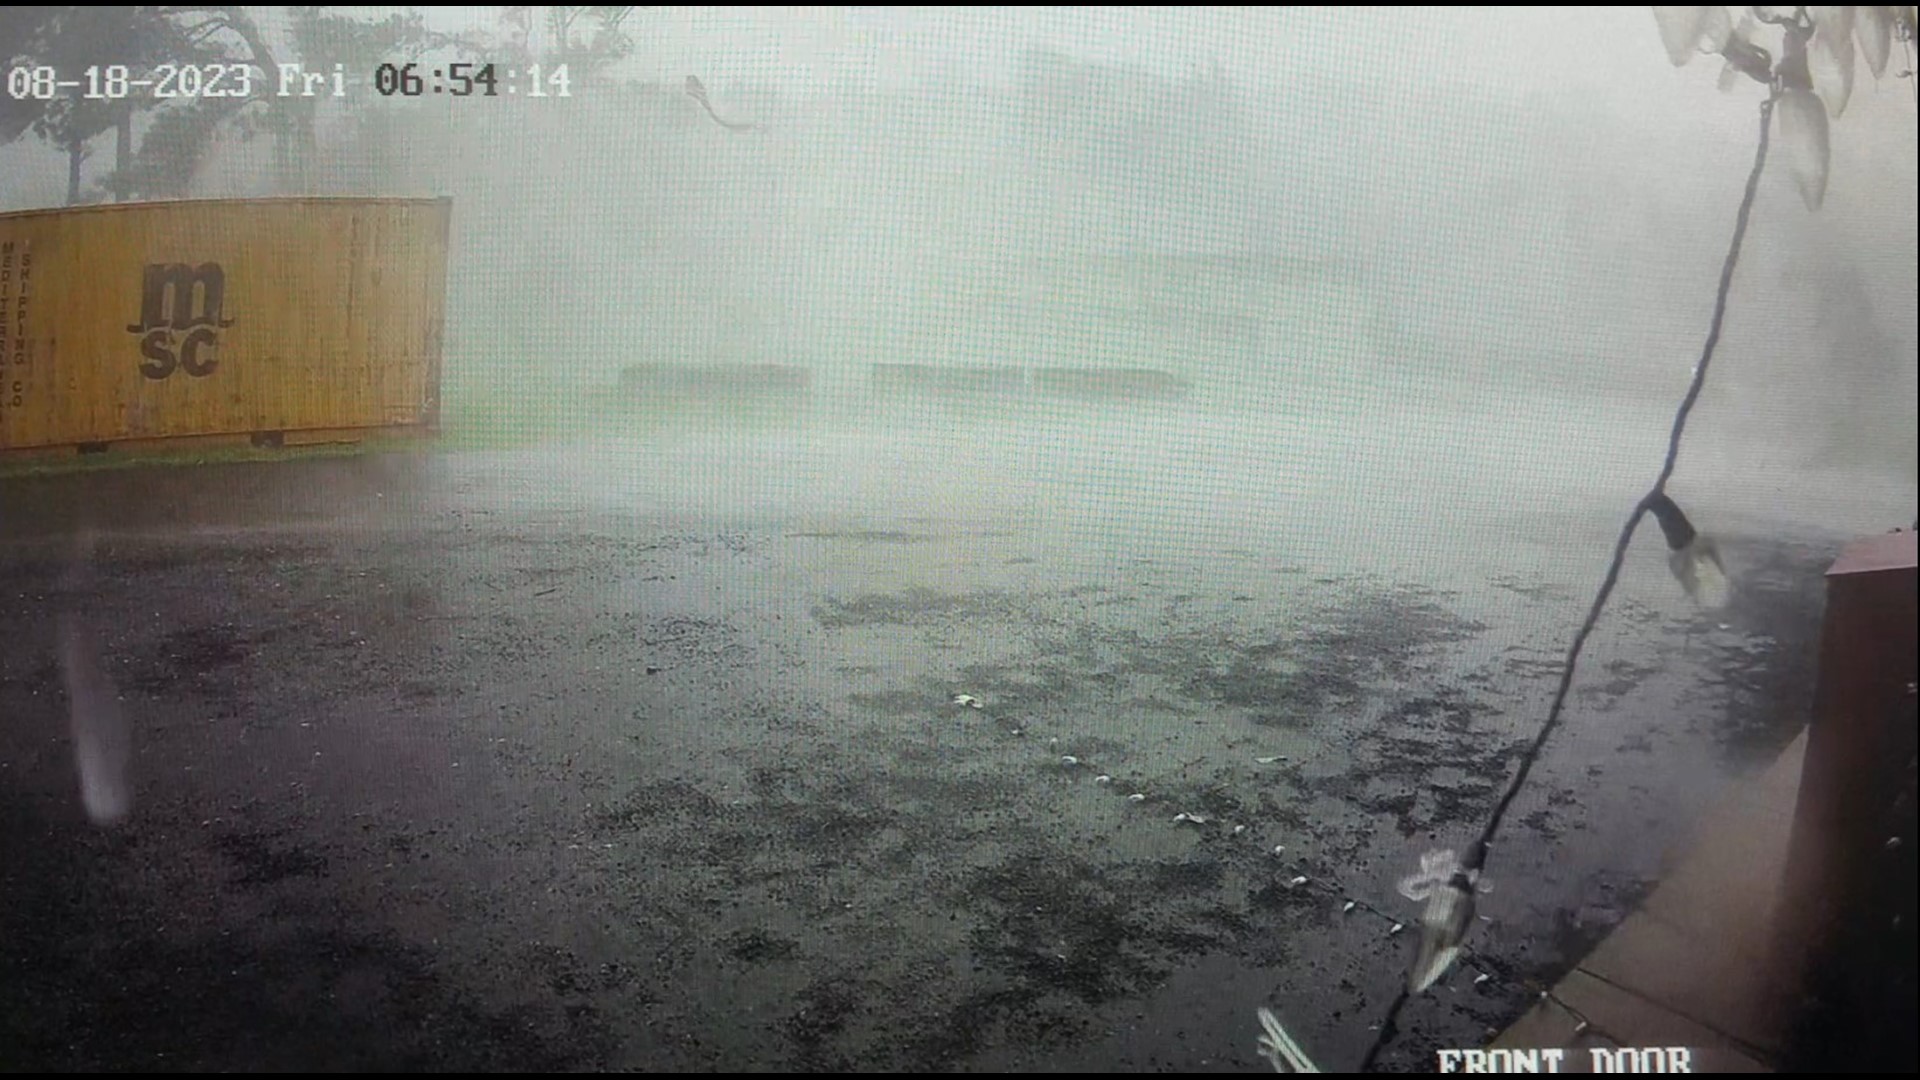 On Friday, Jim Passarello's security cameras captured this video of a tornado that went through his property.